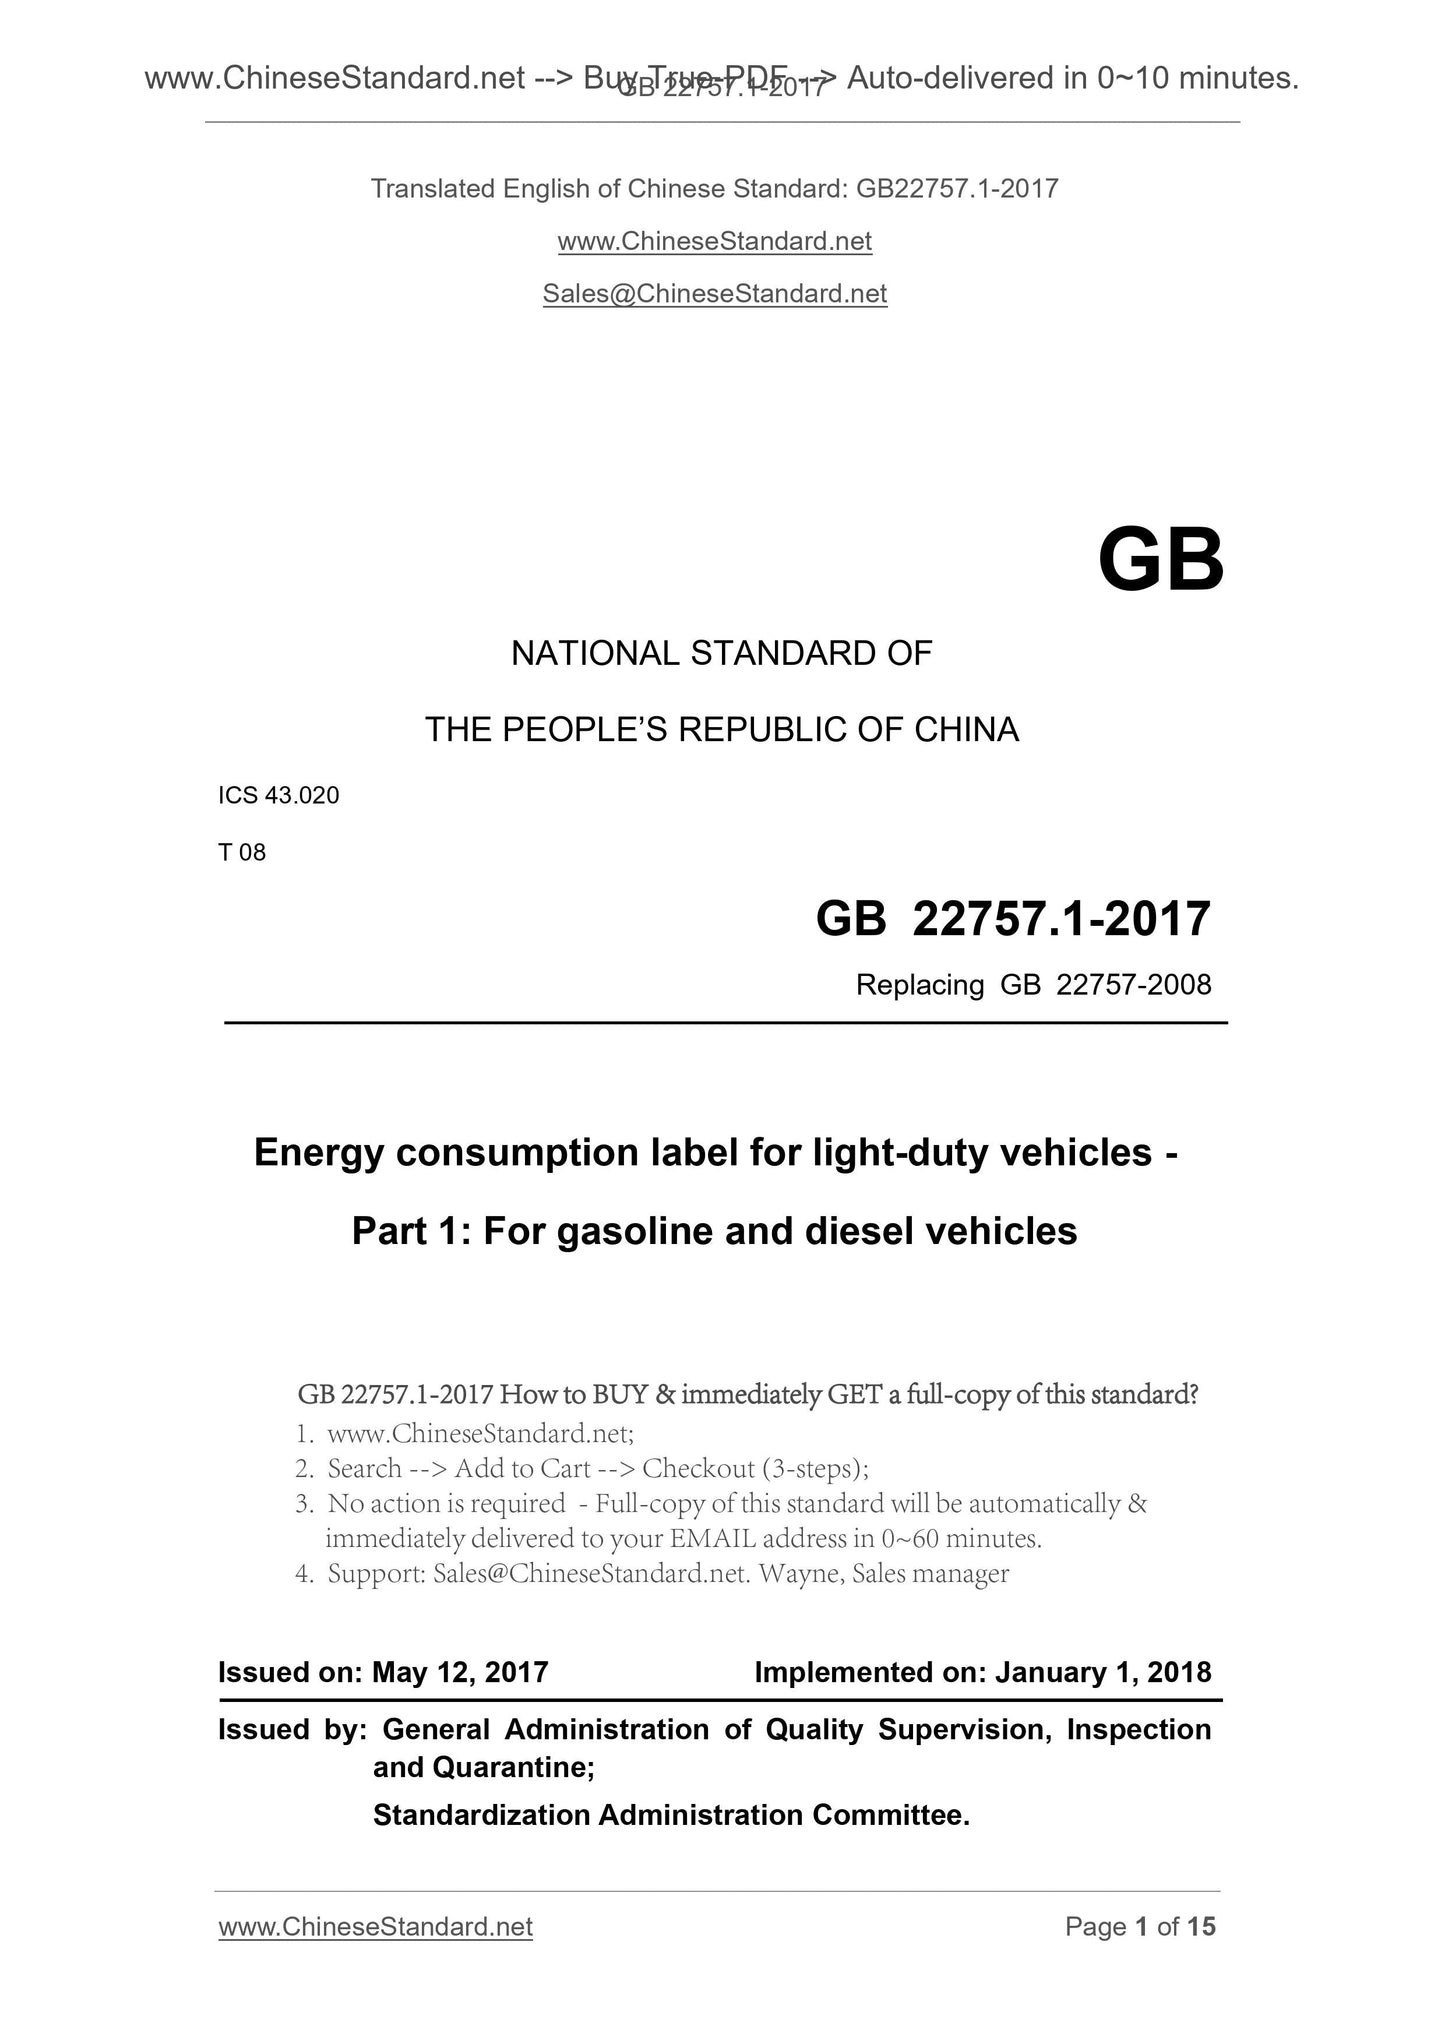 GB 22757.1-2017 Page 1